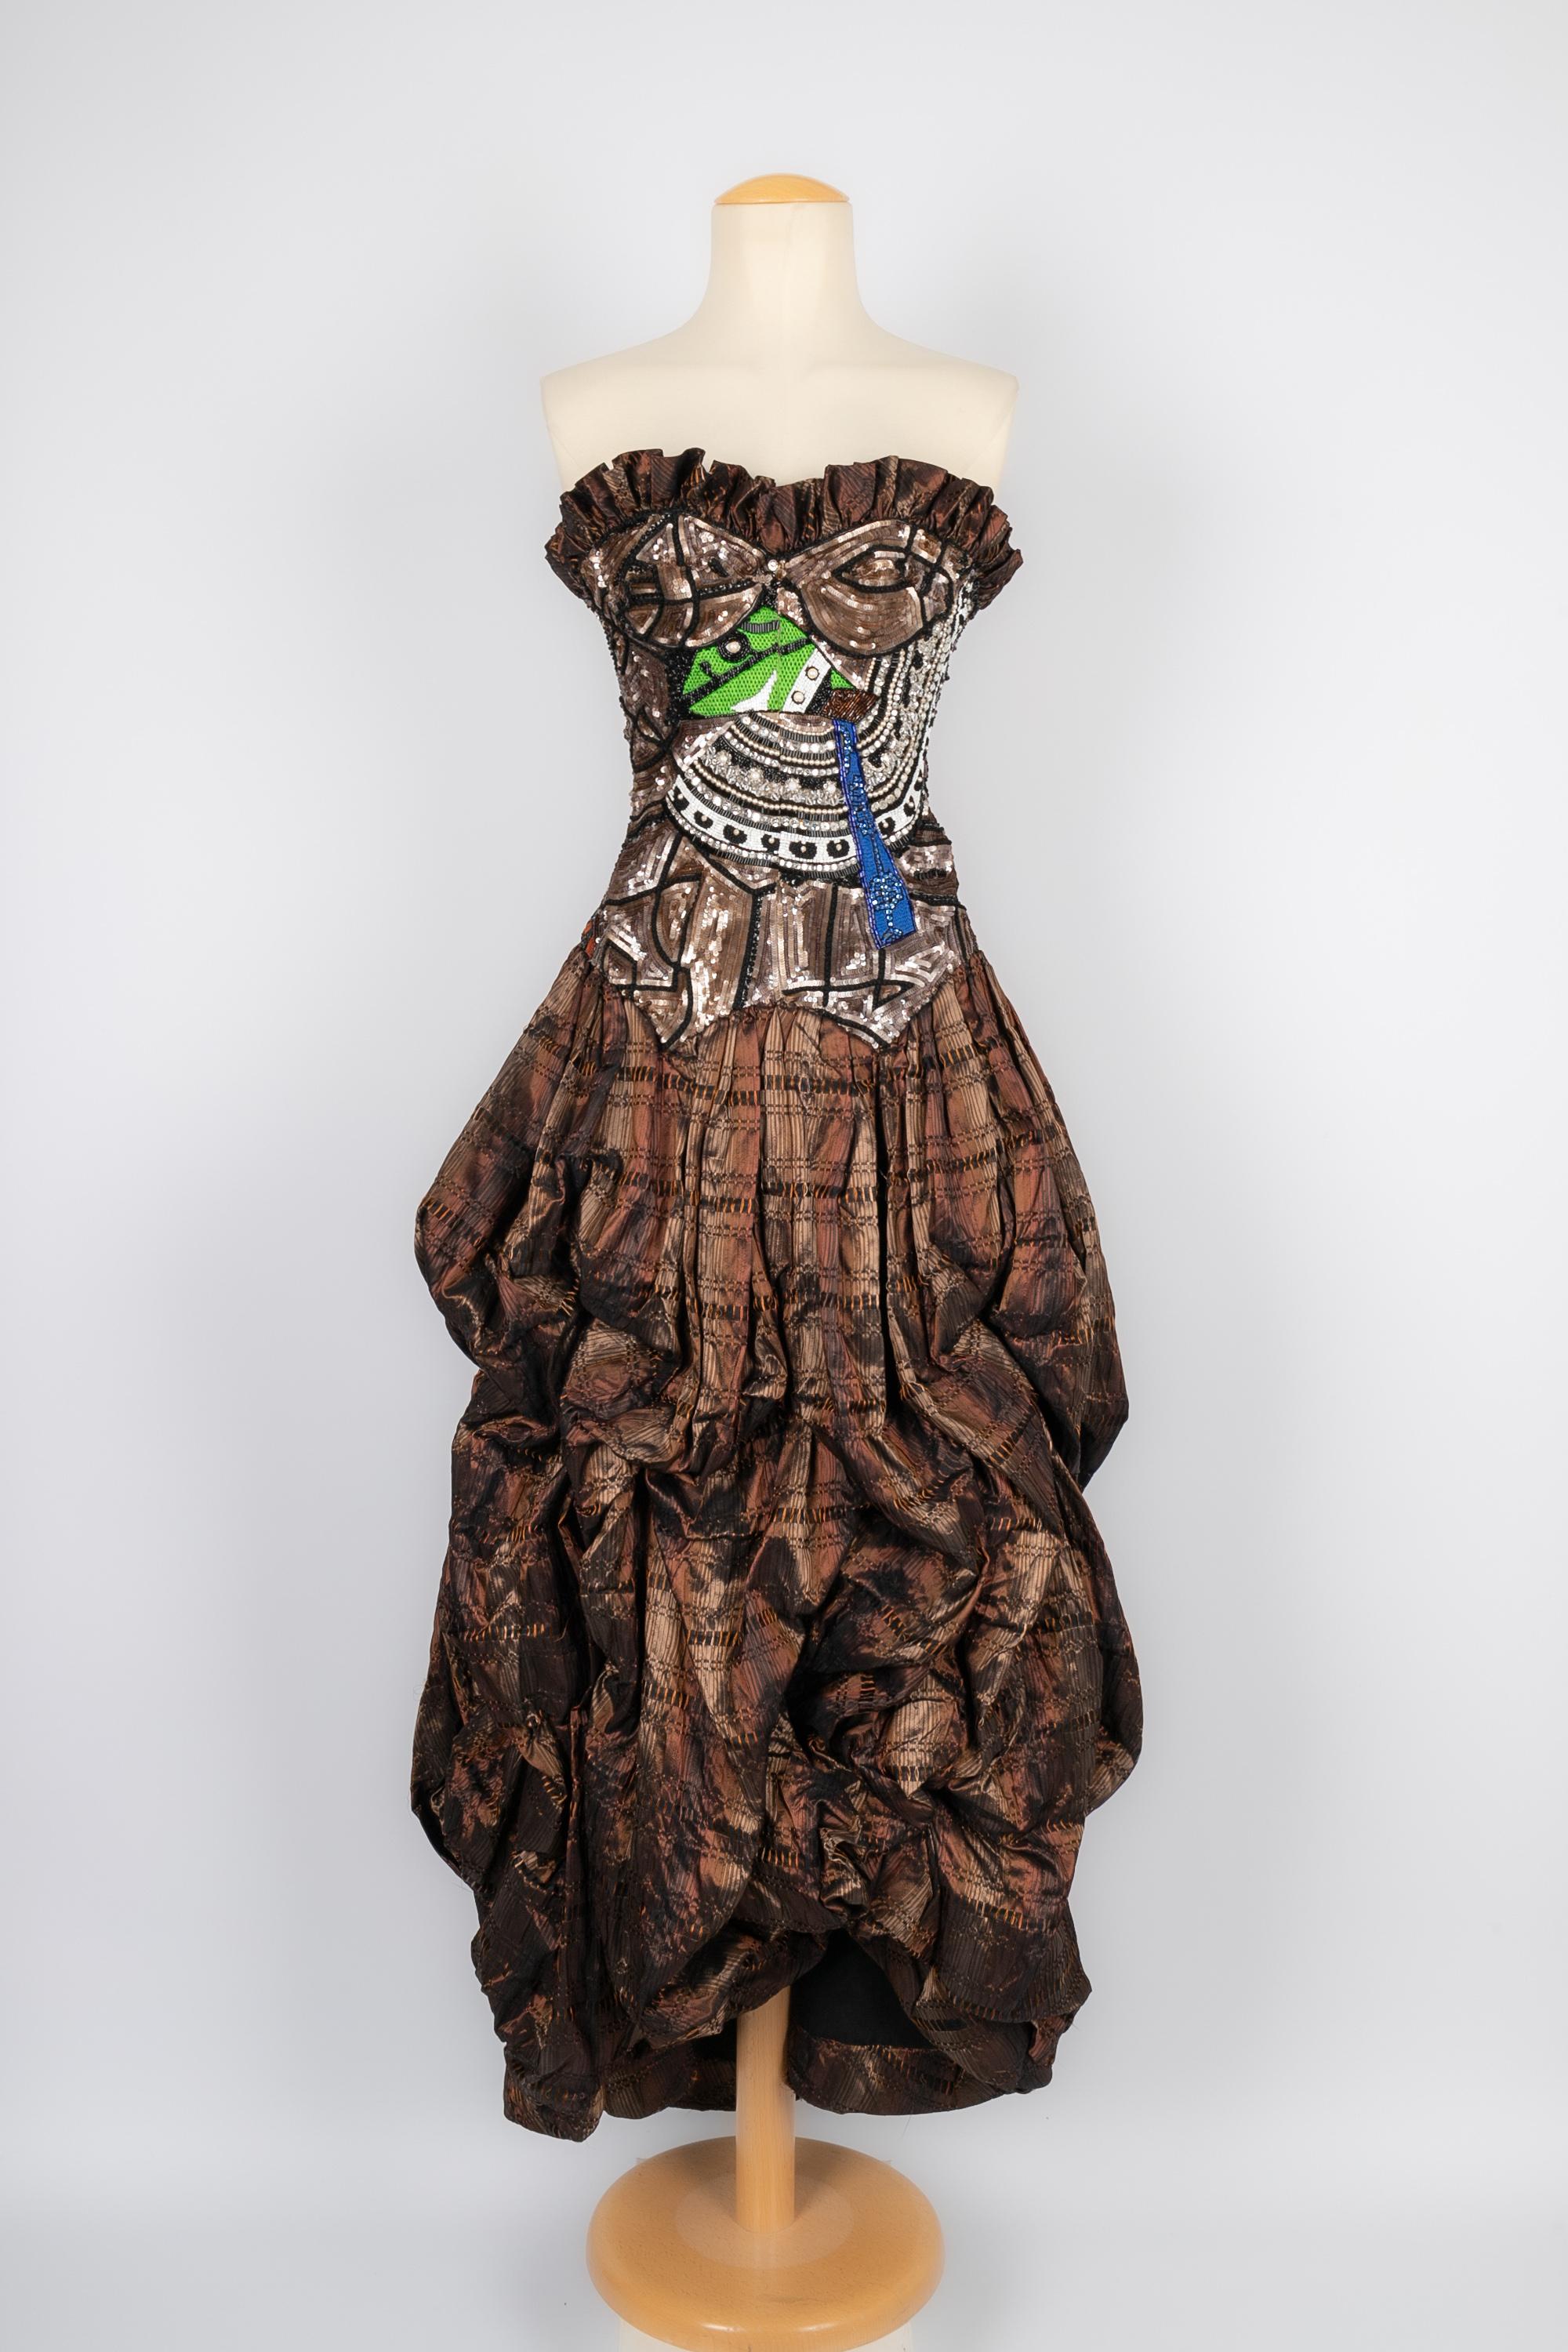 LOUIS FERAUD - (Made in France) Brown silk taffeta bustier dress sewn with sequins. No size nor composition label, it fits a 36FR/38FR. Haute Couture piece.

Condition:
Very good condition

Dimensions:
Chest: 34 cm - Waist: 33 cm - Length: 135